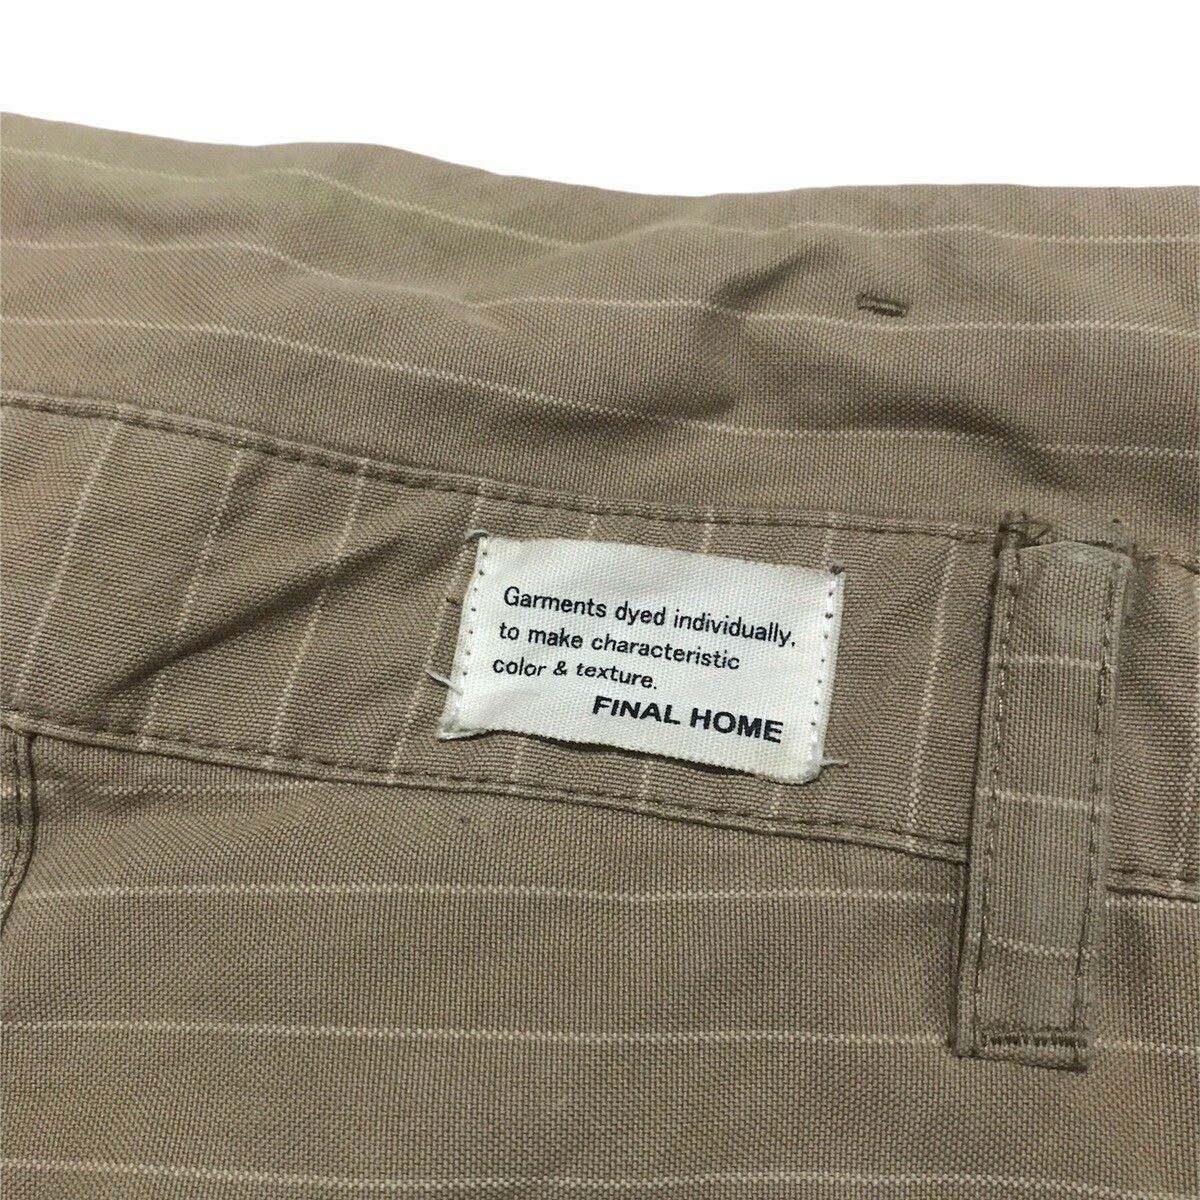 Final Home Military trouser pants - 8